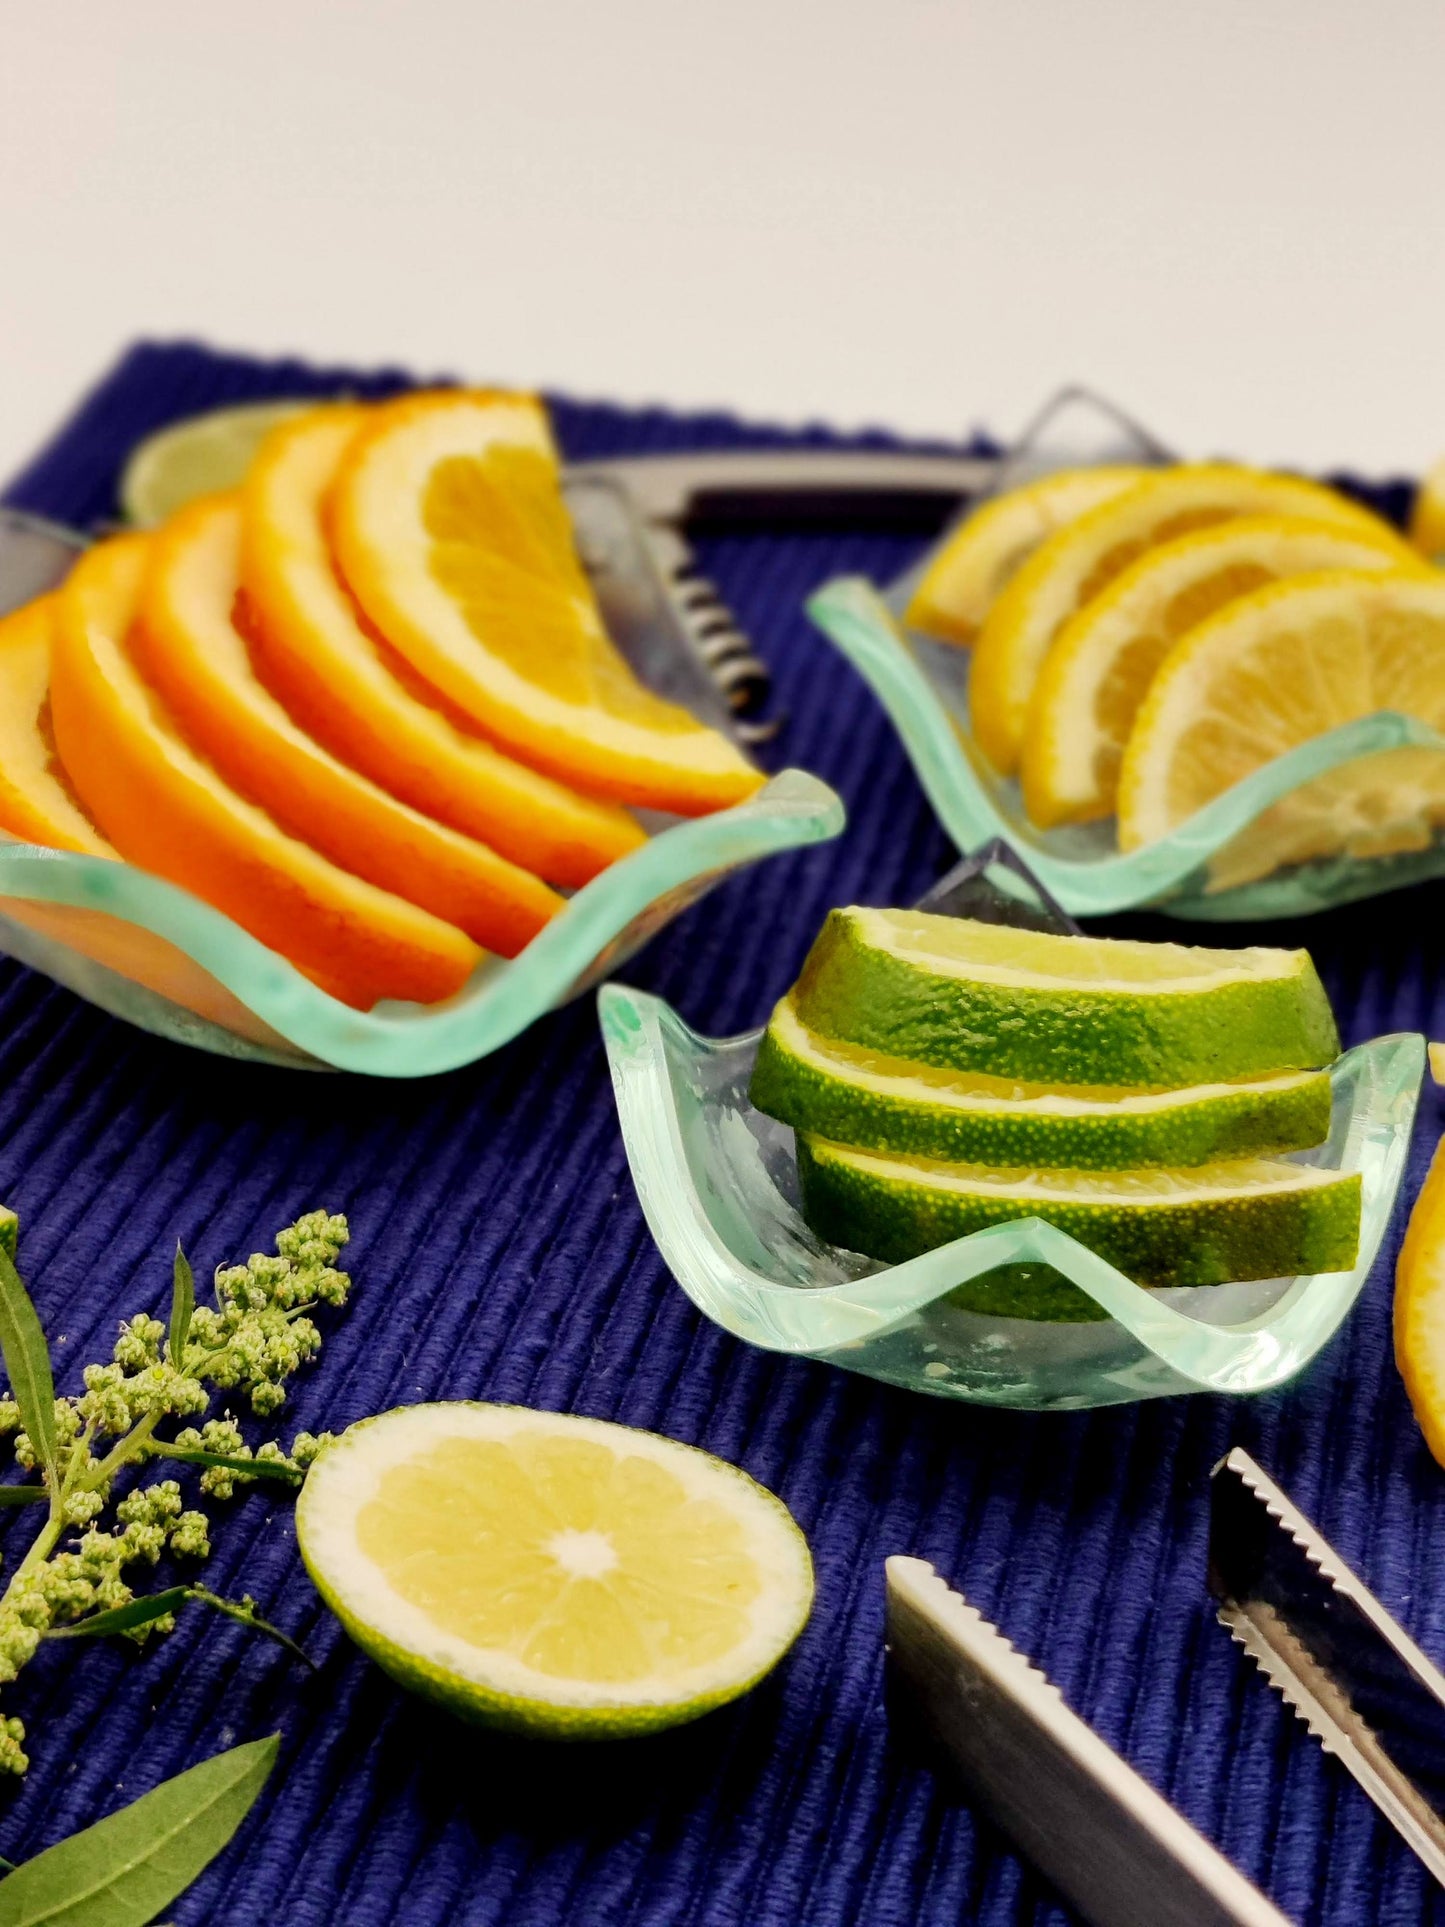 Great for garnishes at Happy Hour! Our Glass pinch bowls come in 3 Different sizes.